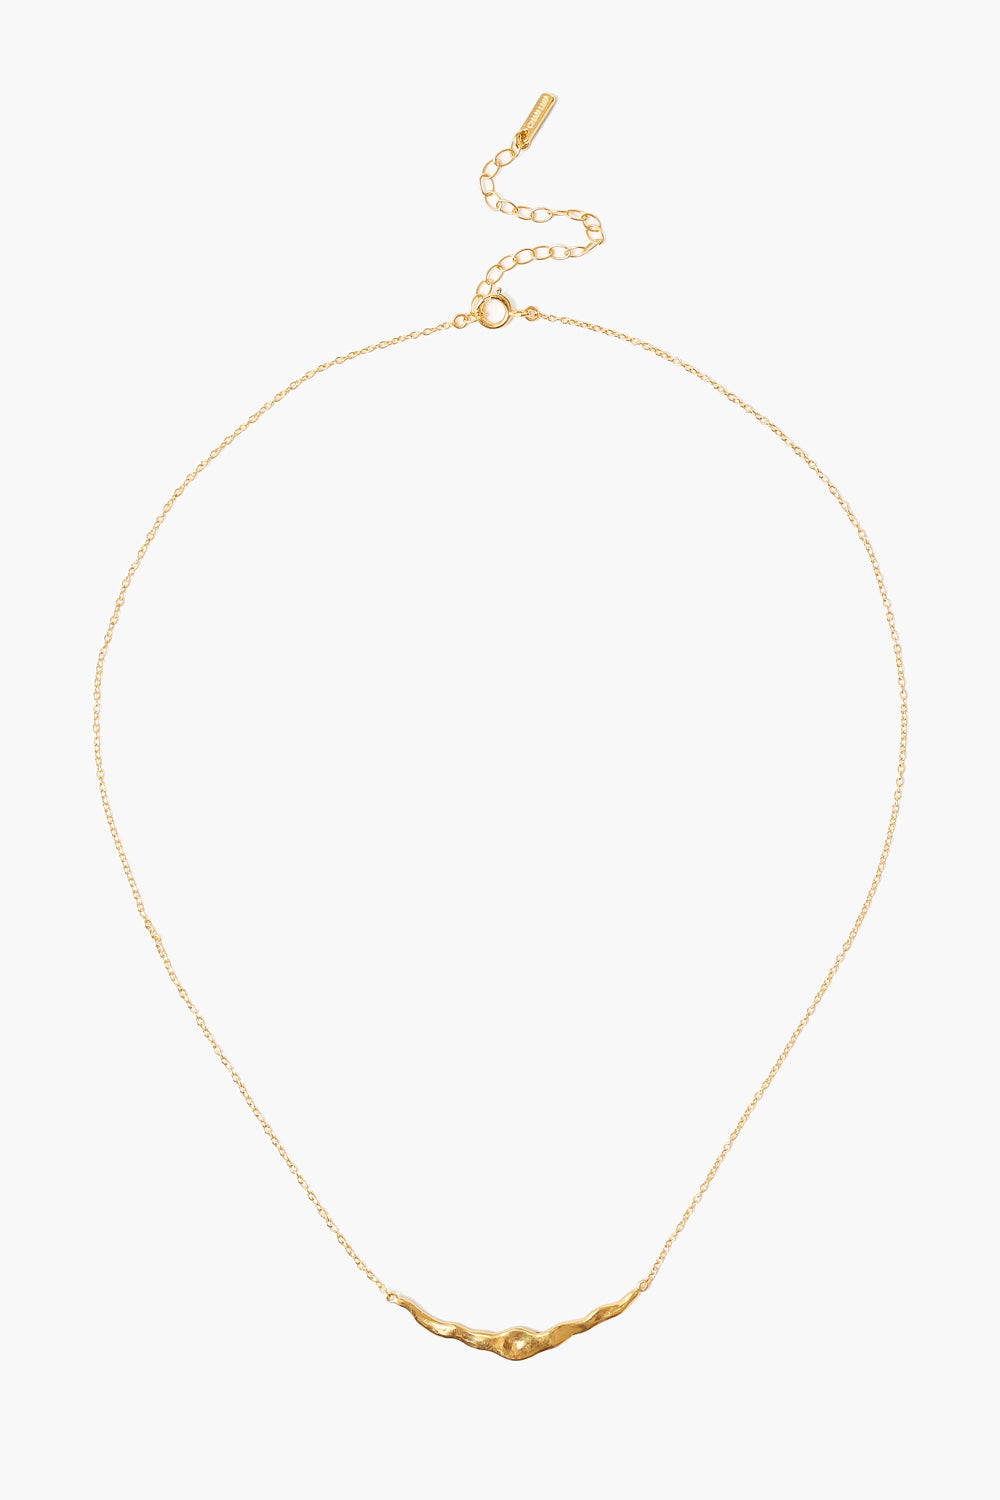 YELLOW GOLD ADJUSTABLE CRESCENT NECKLACE - Kingfisher Road - Online Boutique